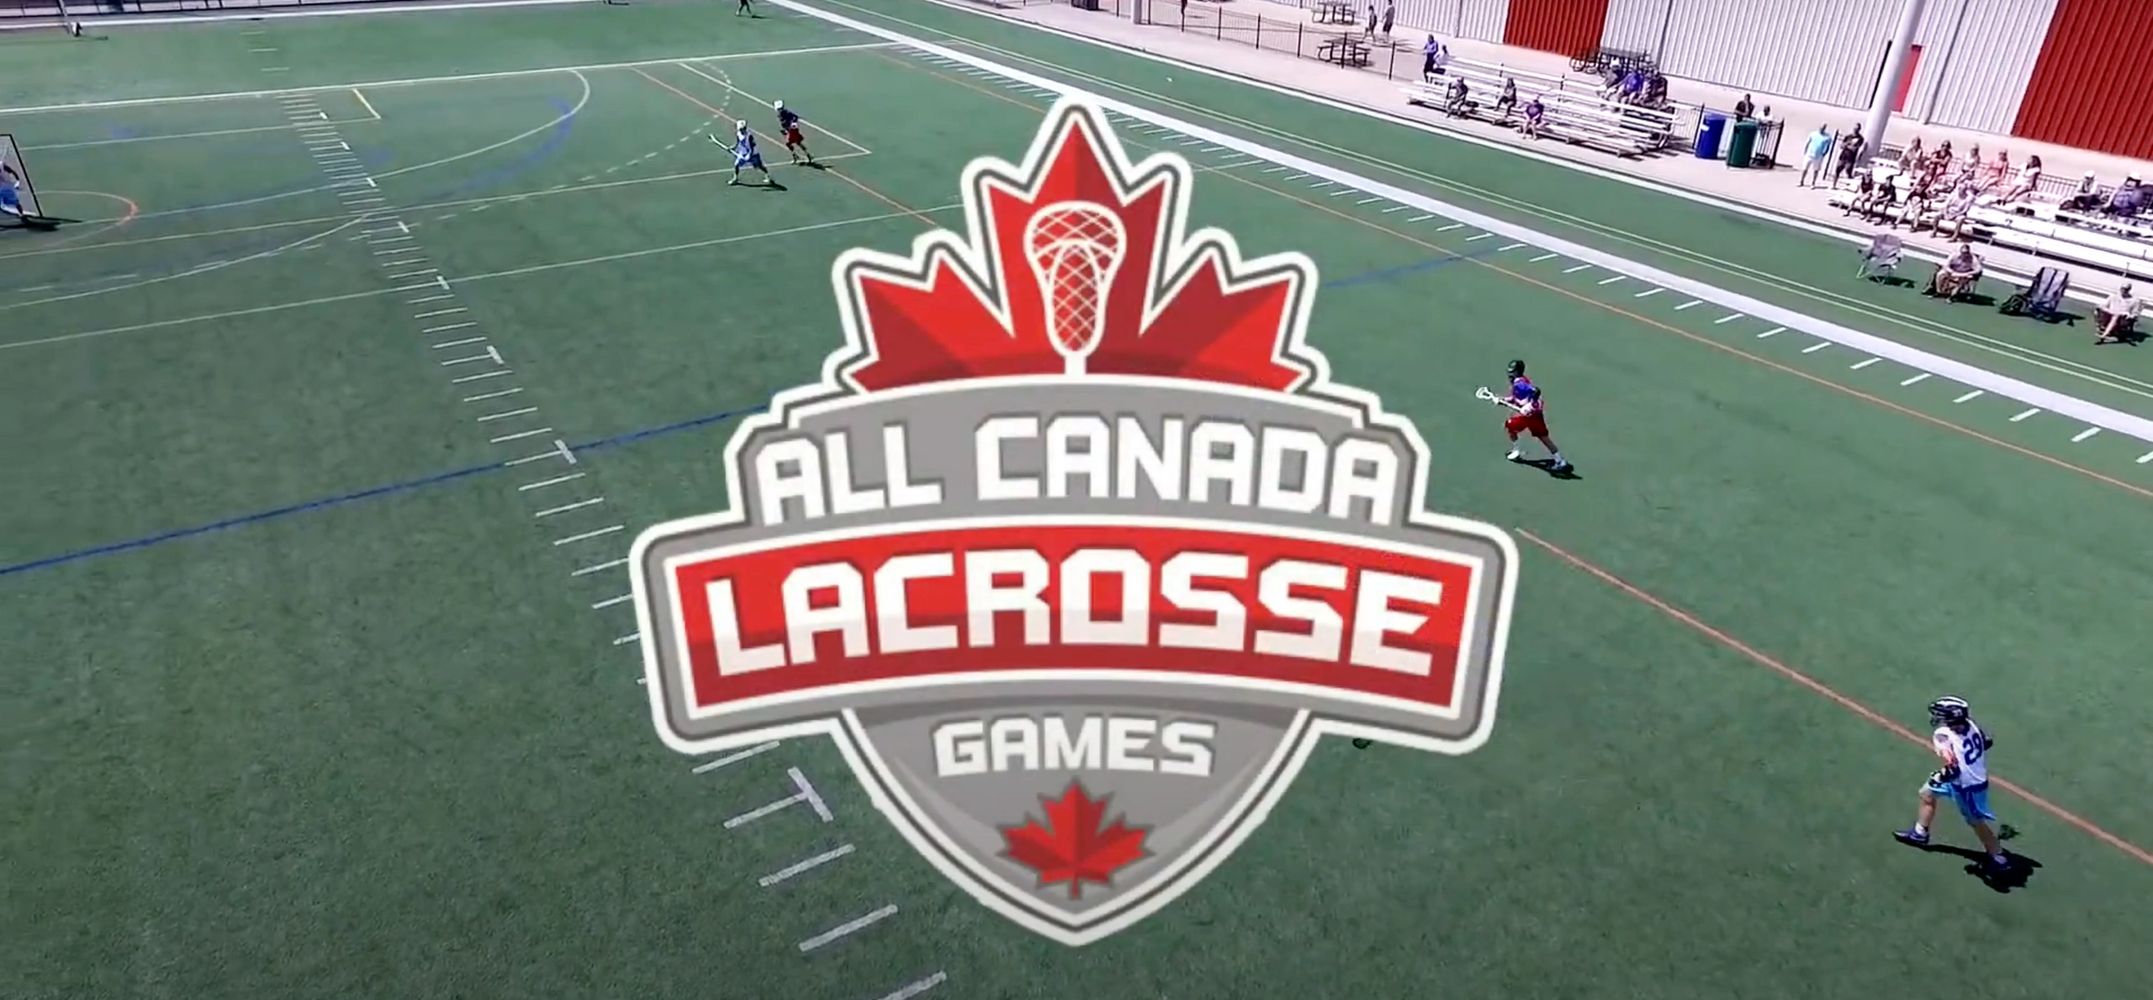 Lacrosse XTreme All Canada Games